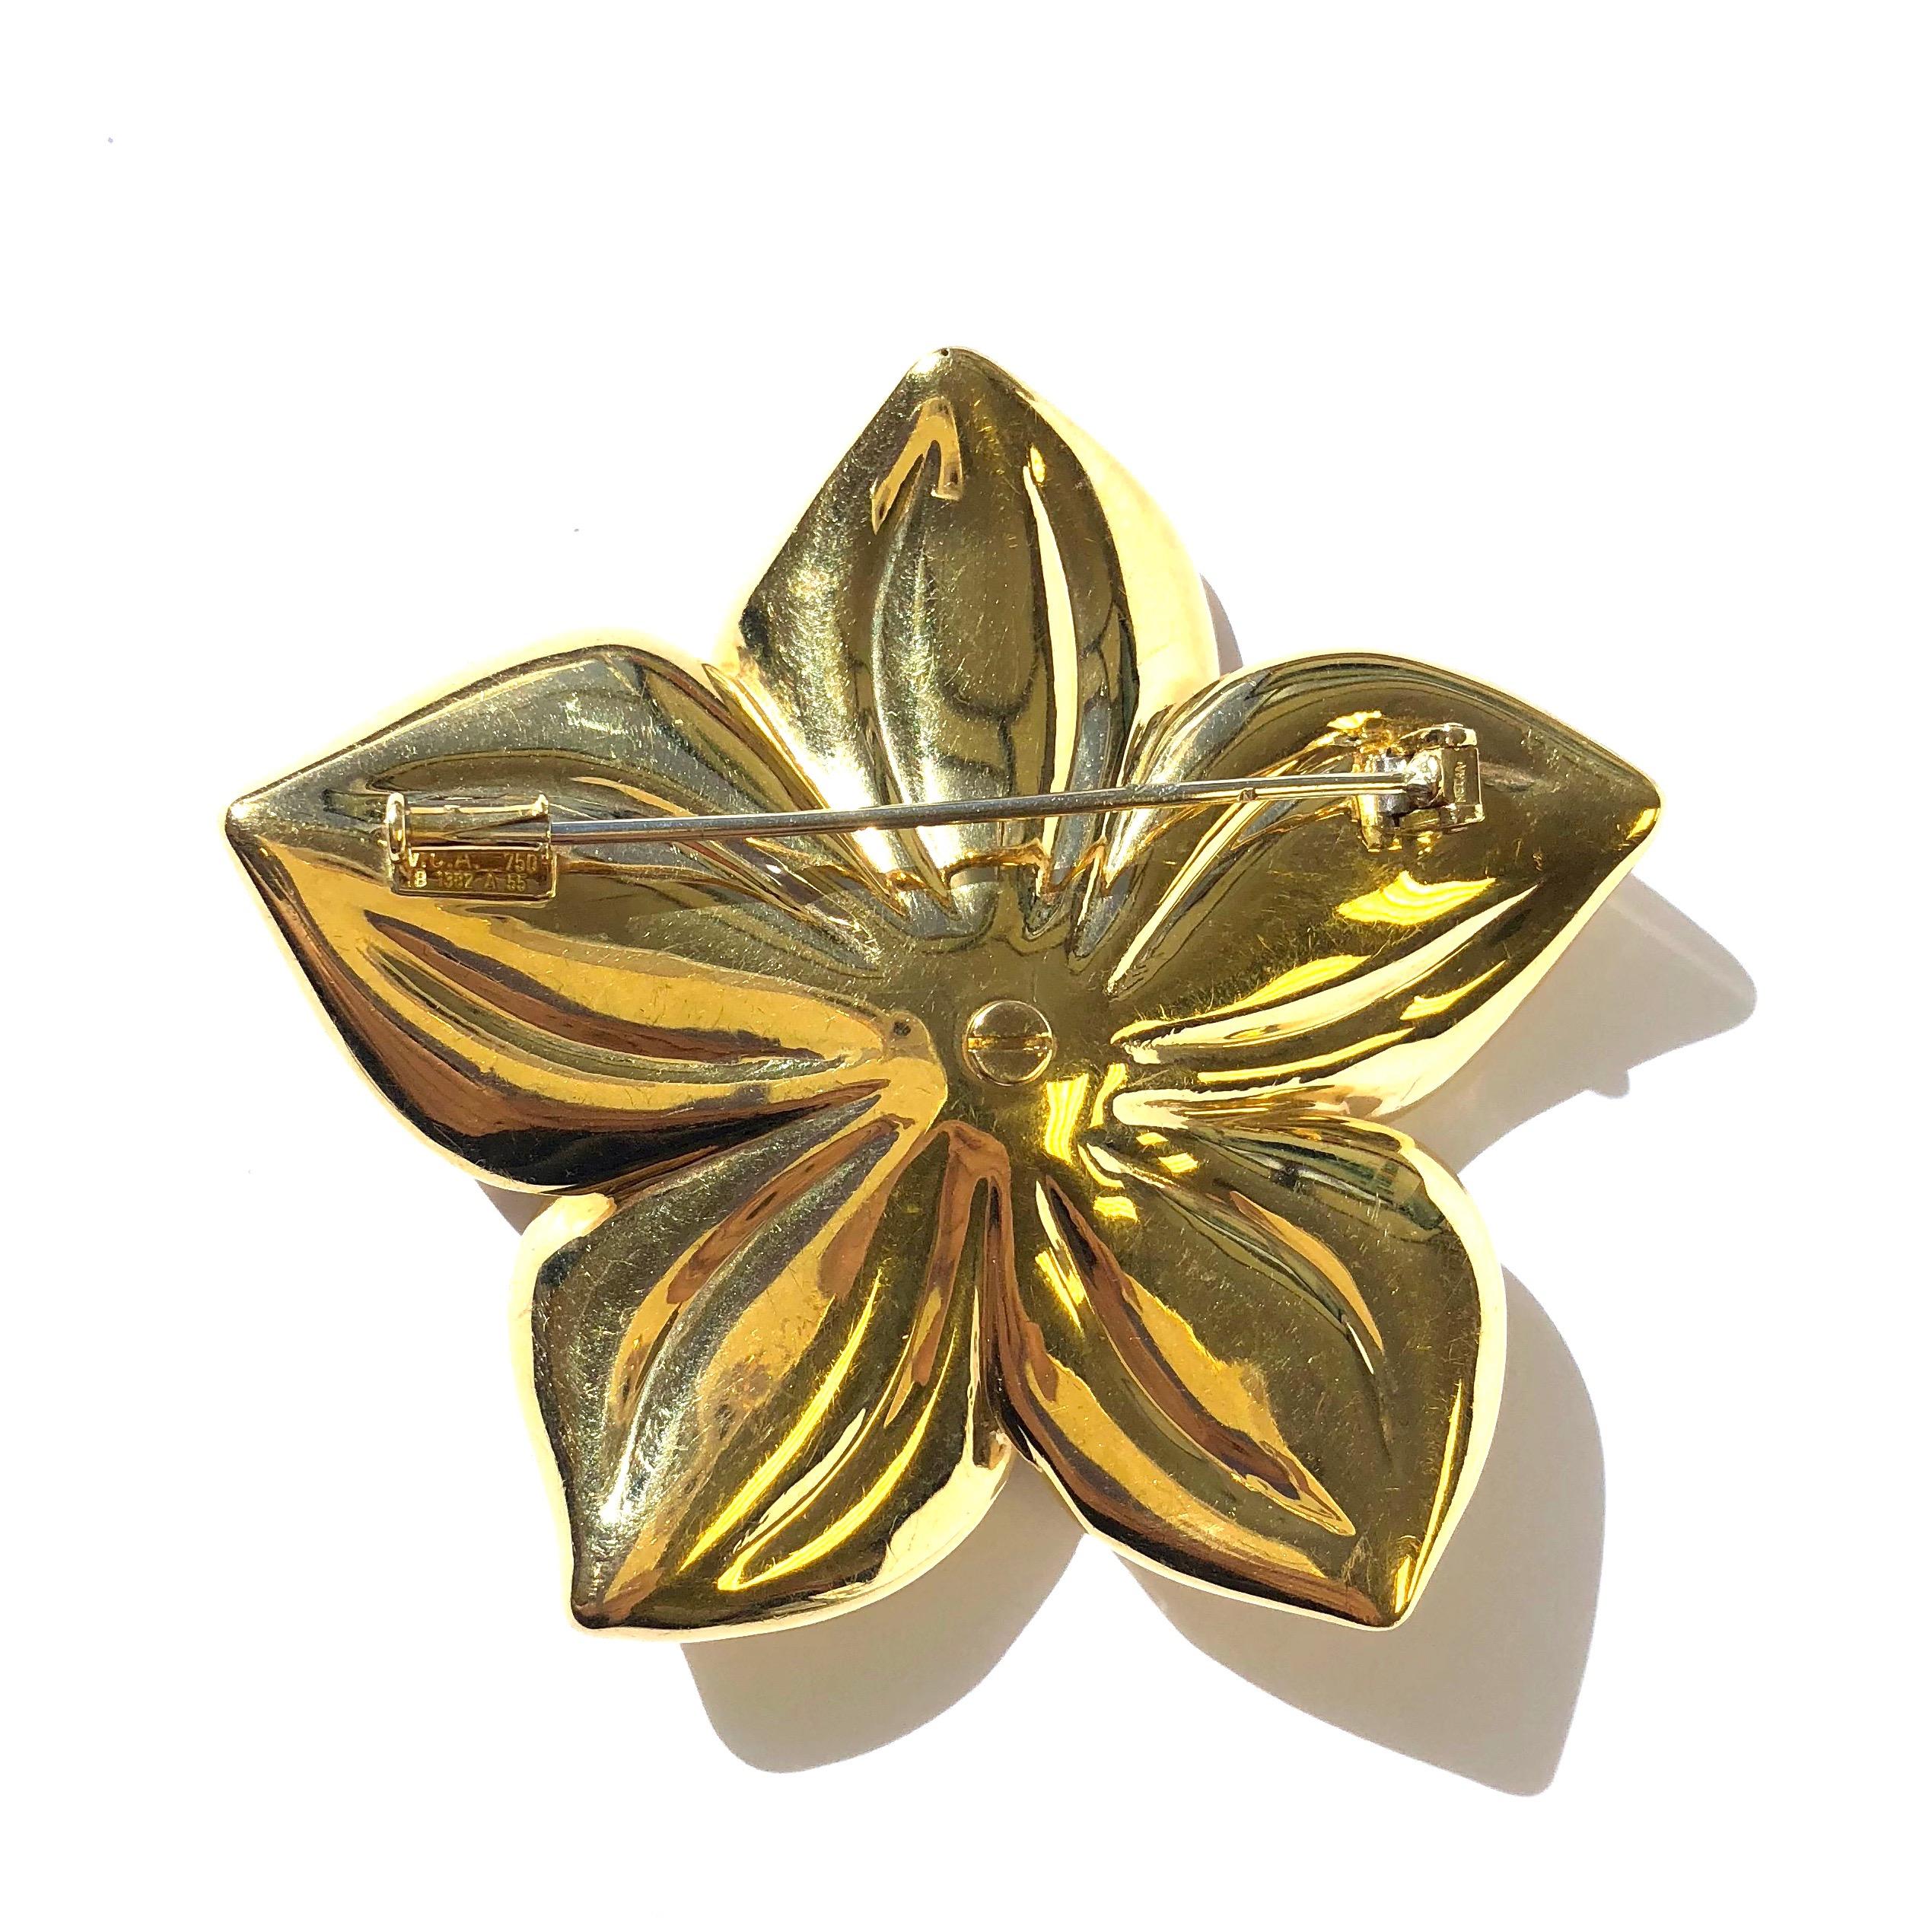 Gorgeous vintage large Van Cleef & Arpels flower brooch, featuring a cluster of eight round brilliant cut diamonds in center, surrounded by five flower petals. 
Approximate total diamond weight: 0.90ct. Color: G, Clarity: VS
Measurements: 2 11/16